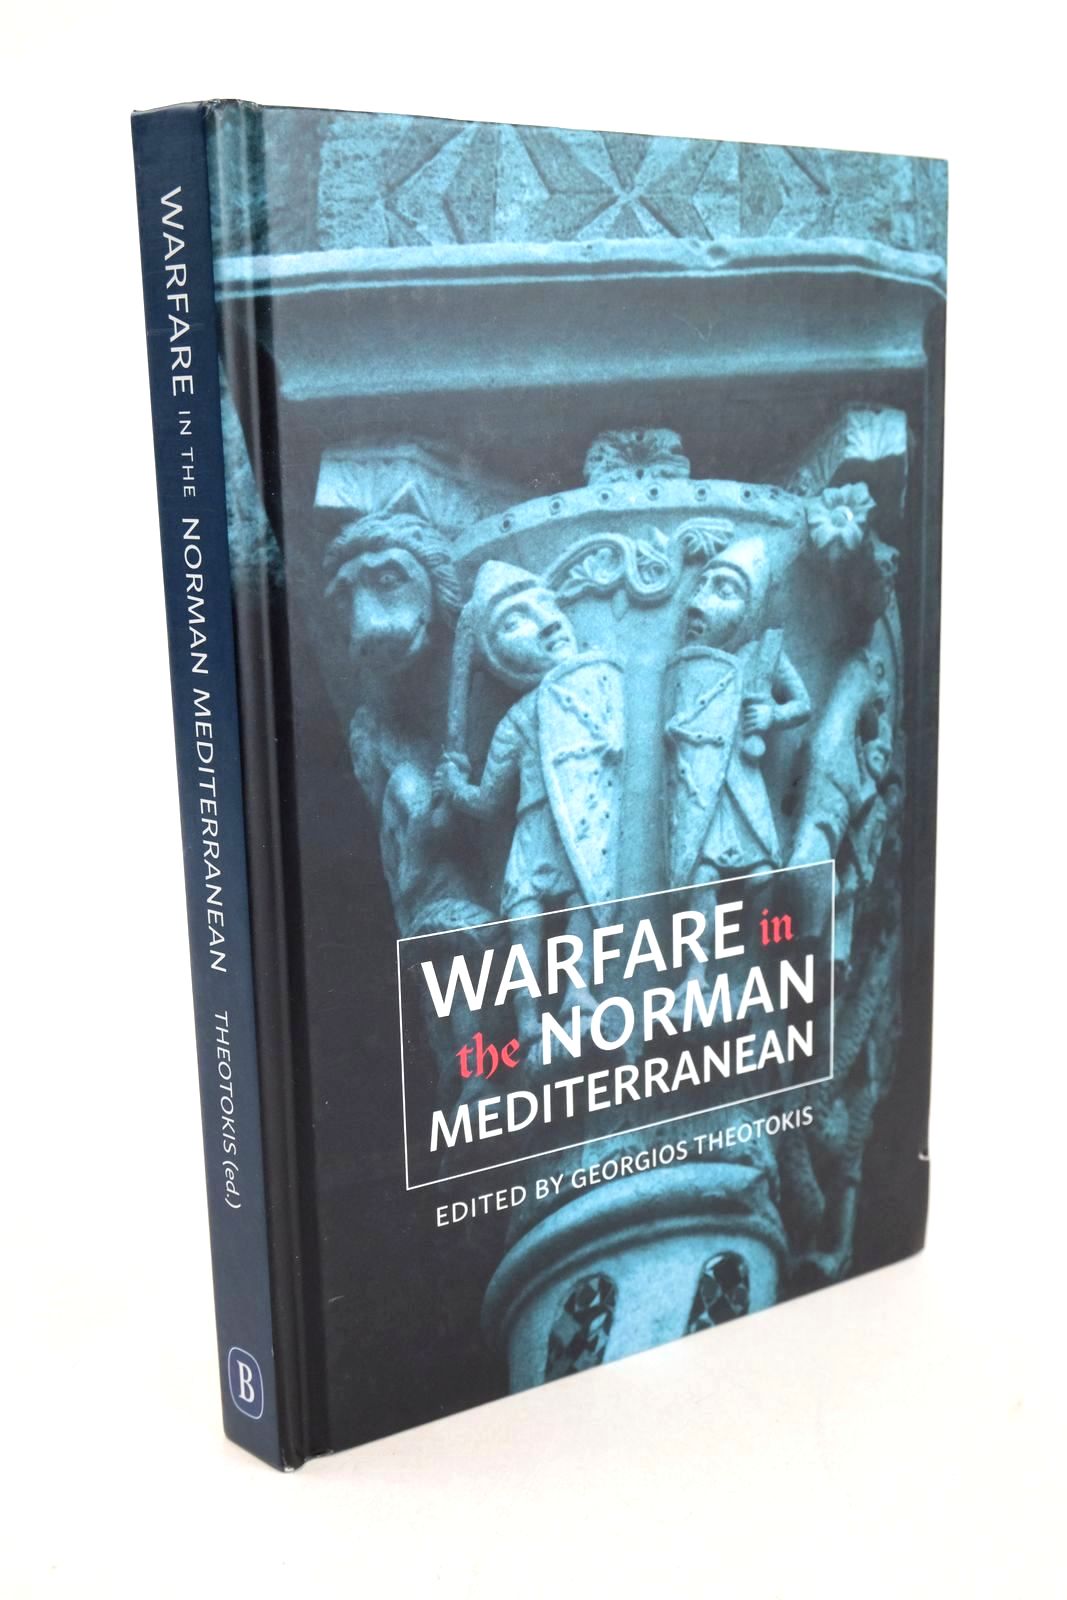 Photo of WARFARE IN THE NORMAN MEDITERRANEAN written by Theotokis, Georgios published by The Boydell Press (STOCK CODE: 1327420)  for sale by Stella & Rose's Books